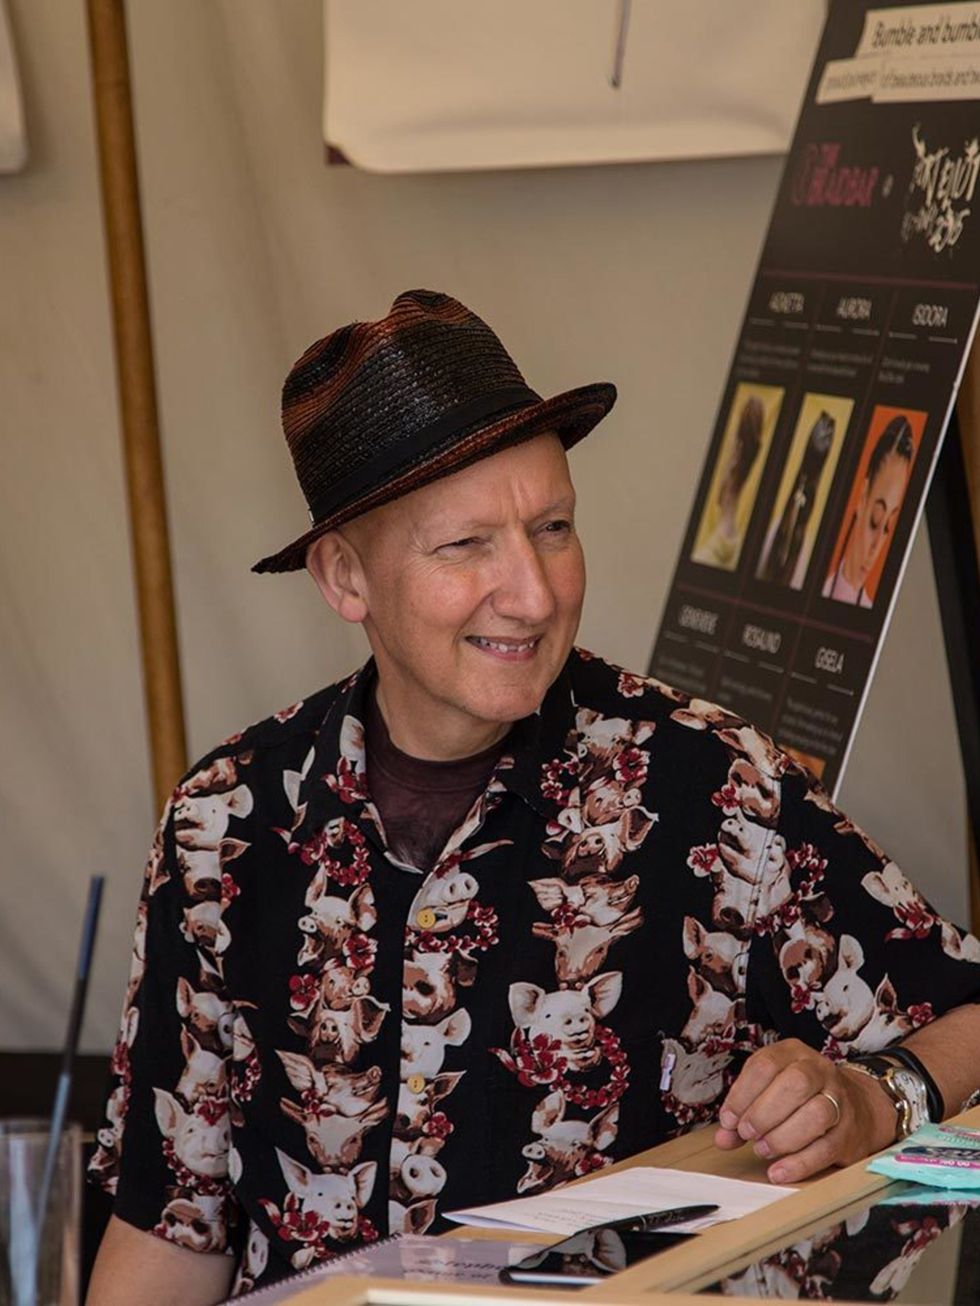 Festival favourite Stephen Jones. The milliner created fantastical headgear creations in line with this years Game of Thrones theme.